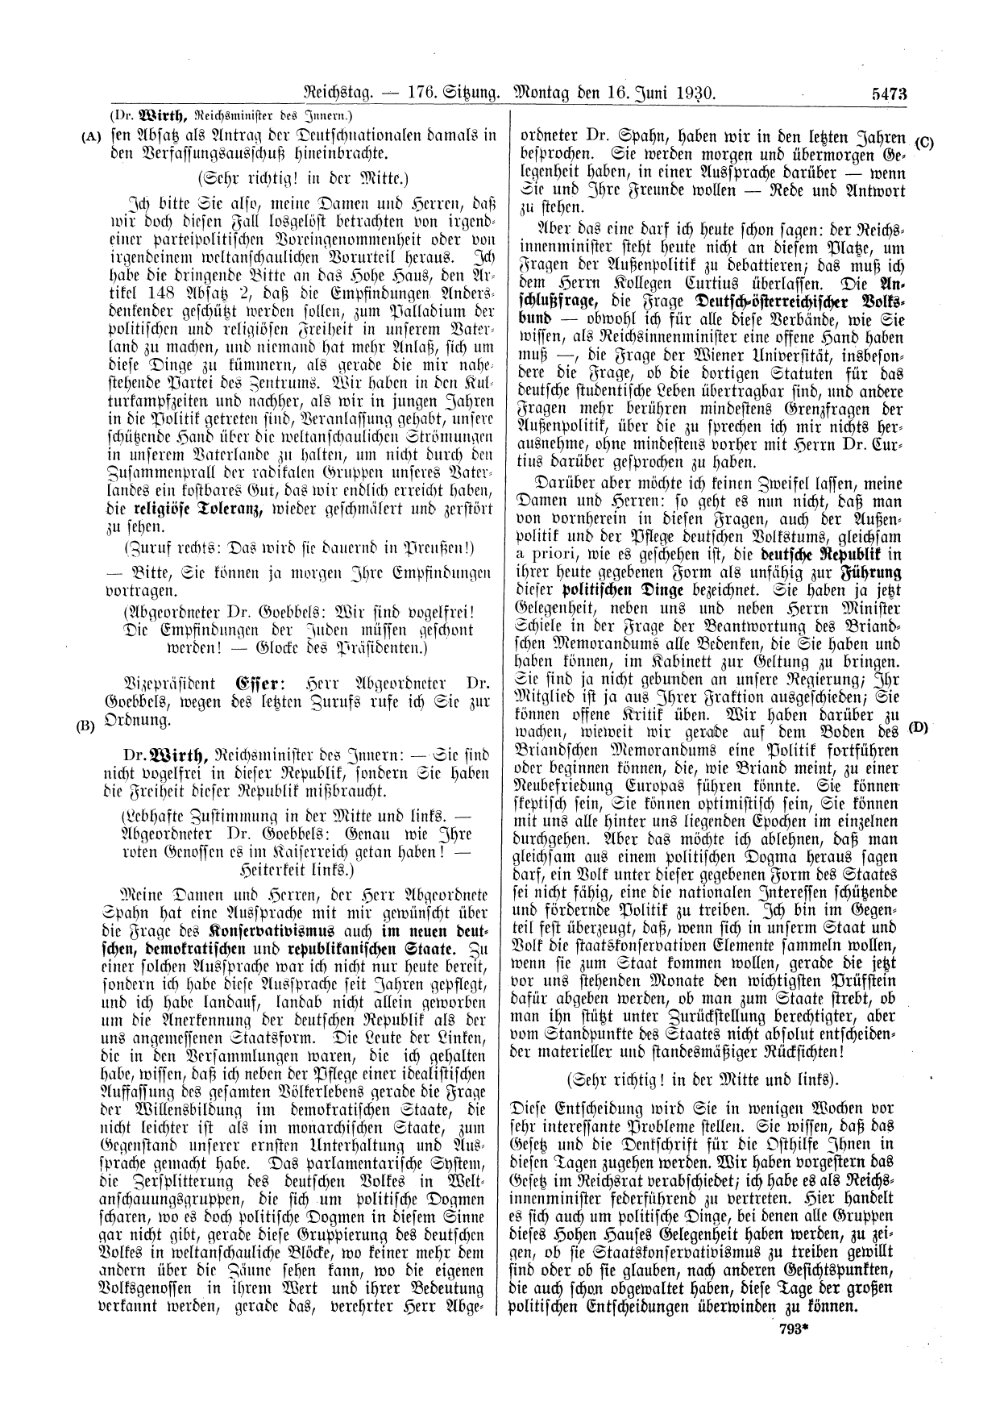 Scan of page 5473